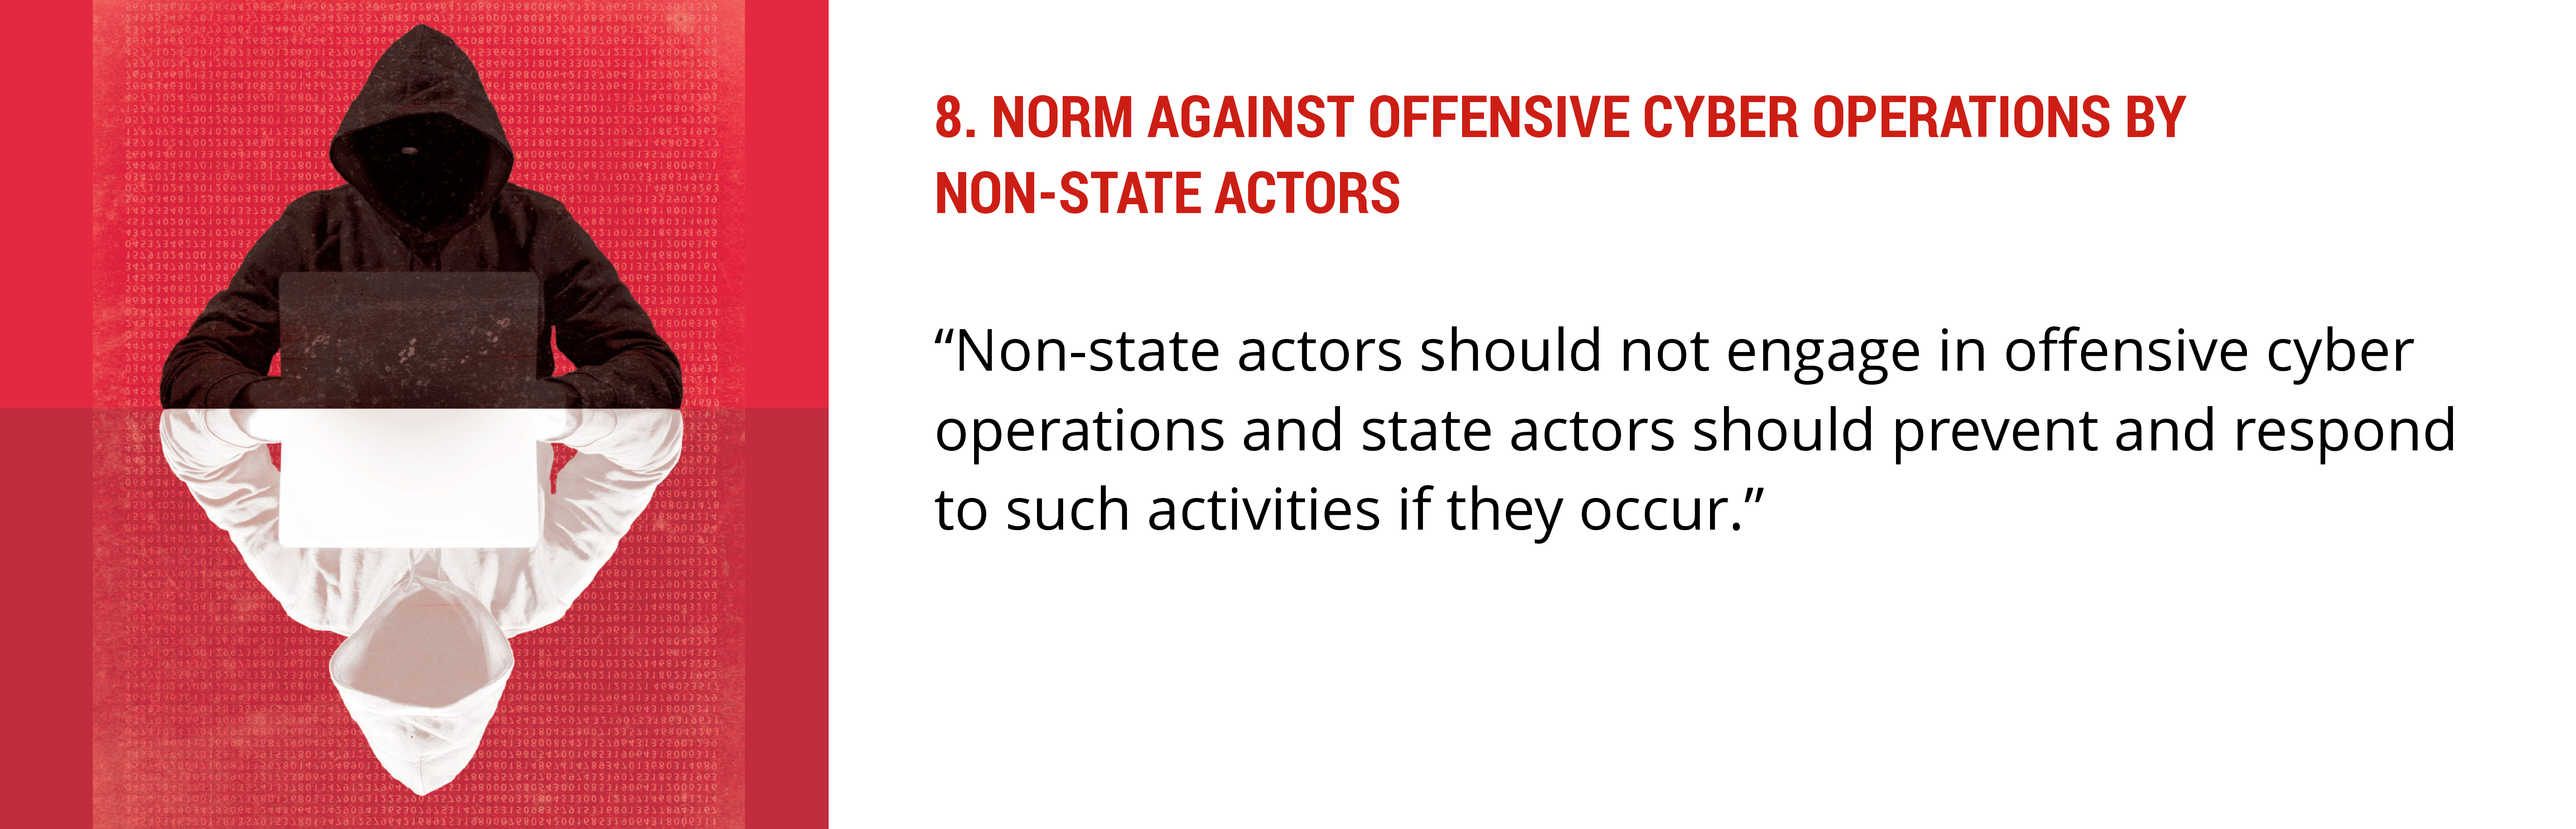 Norm Against Offensive Cyber Operations by Non-State Actors 